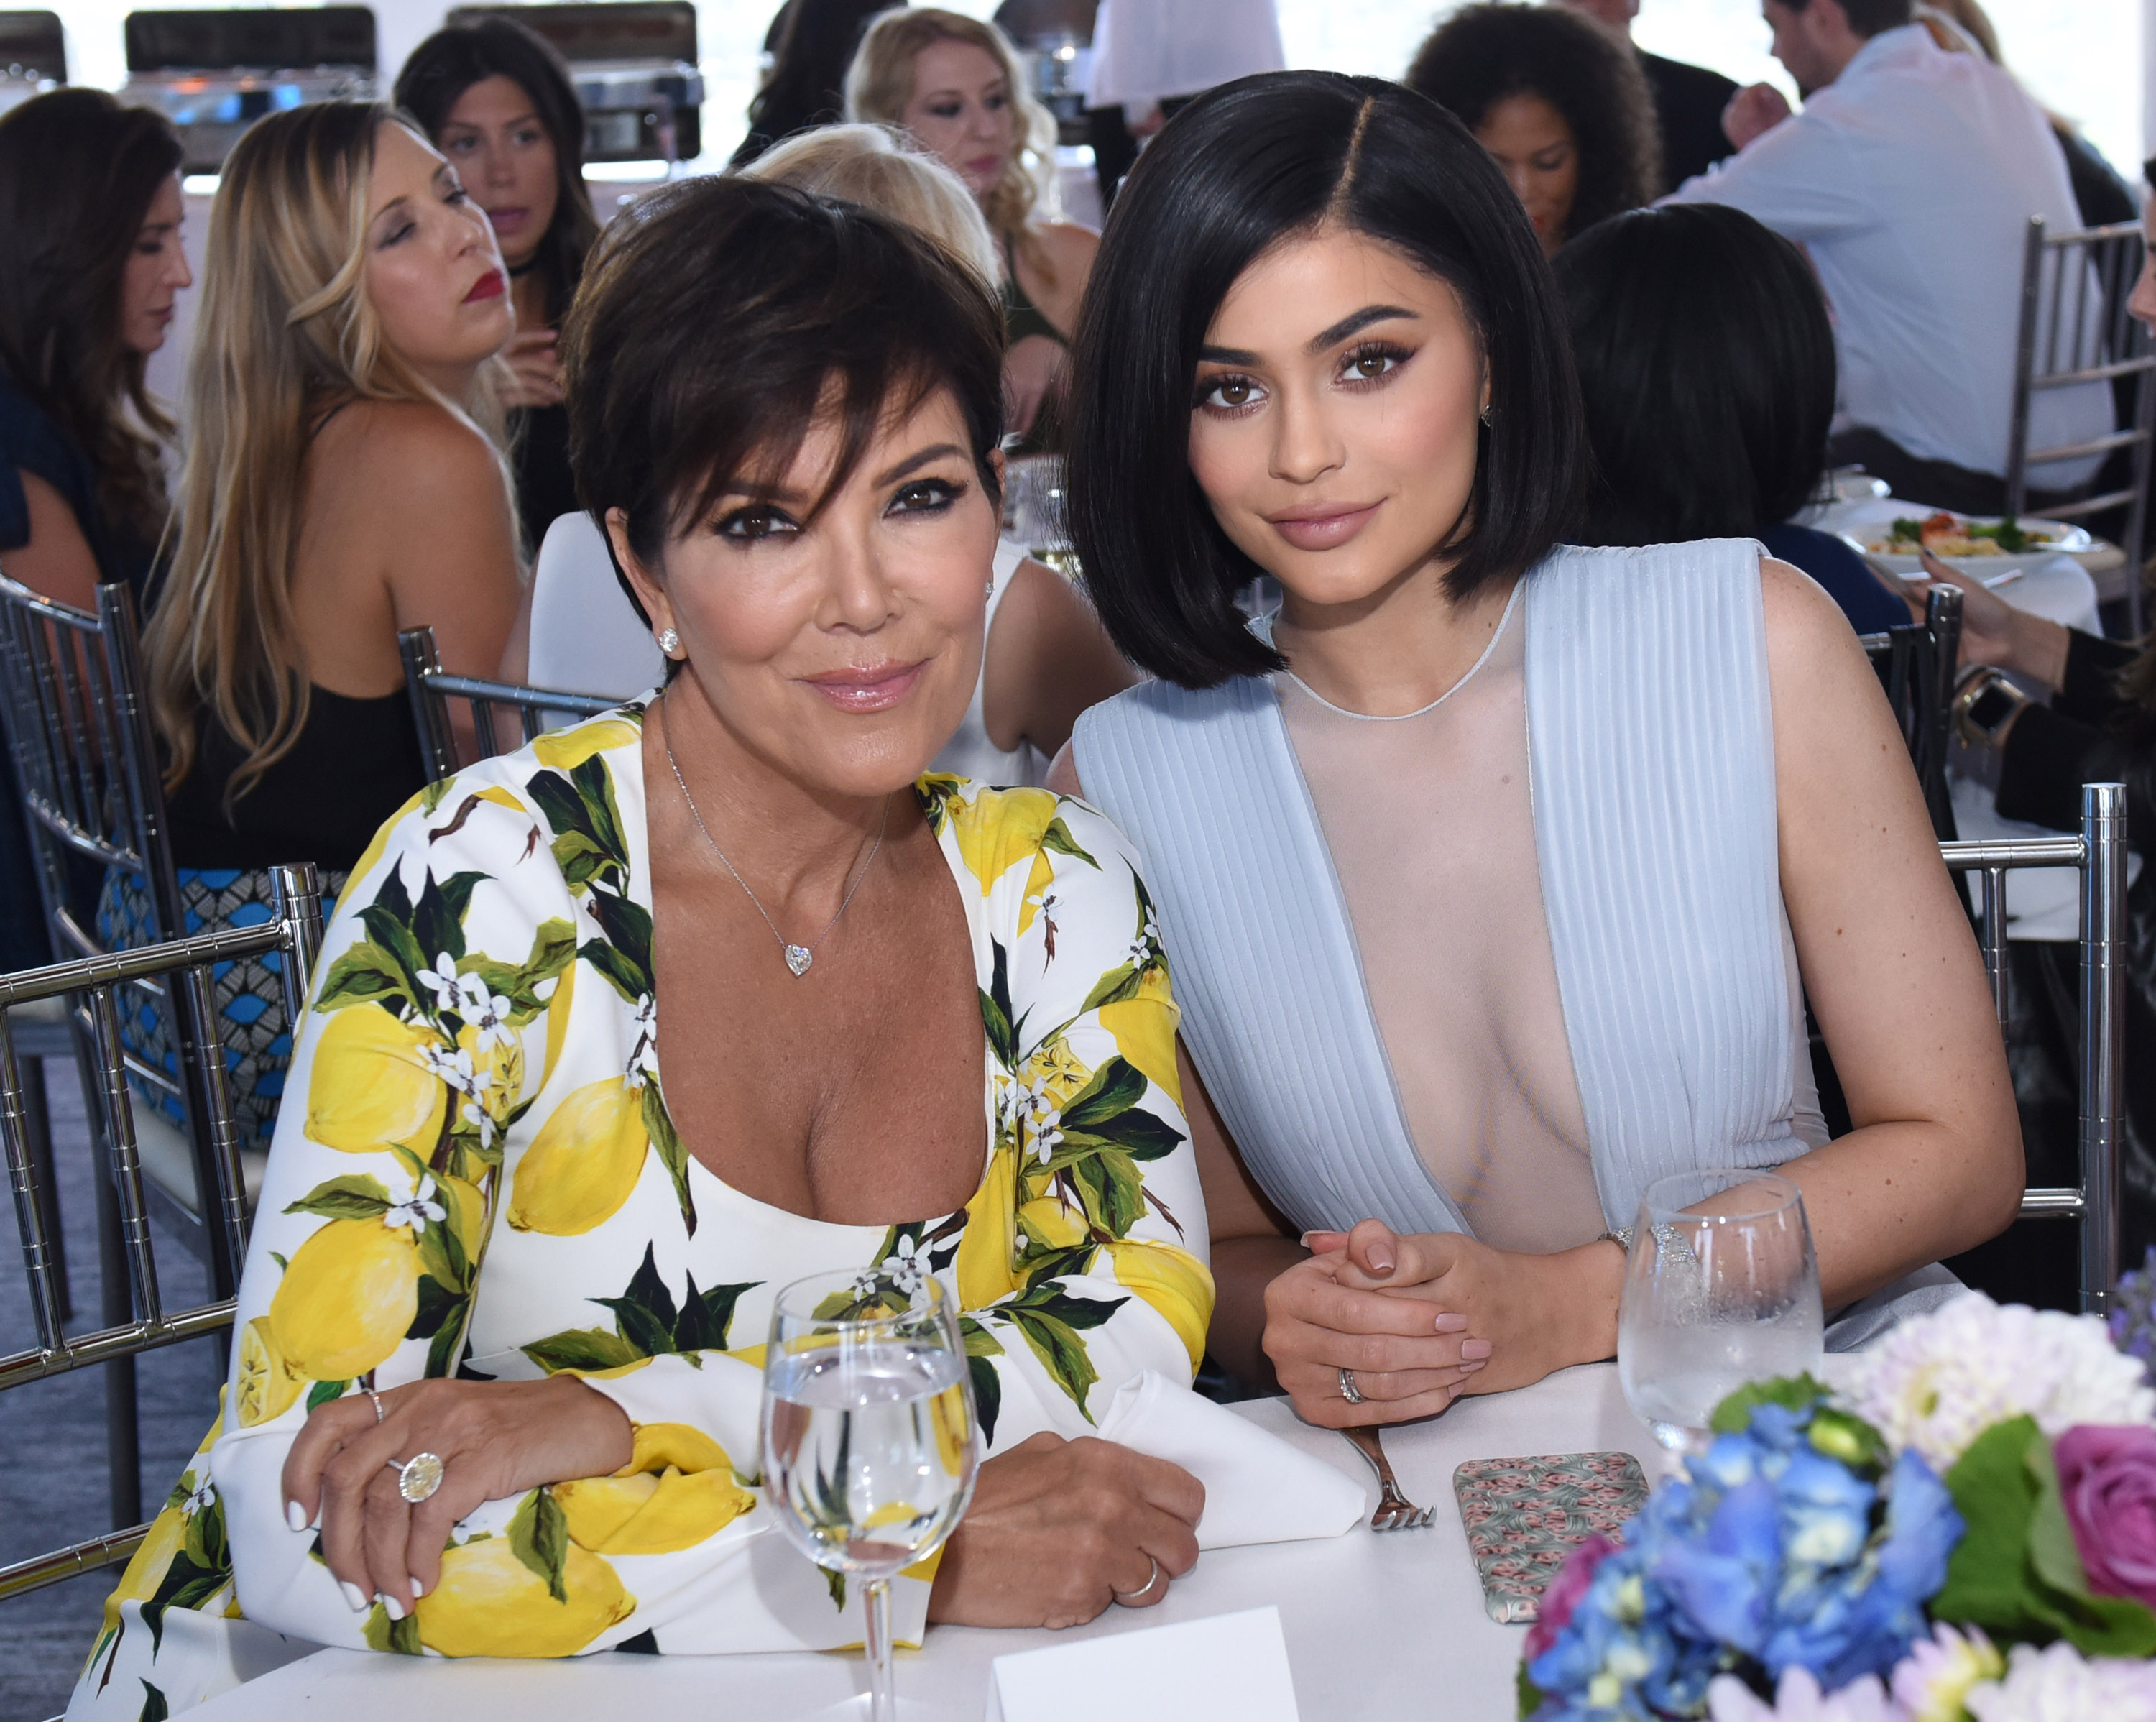 Kris Jenner in a white shirt with lemons and Kylie Jenner in a blue top